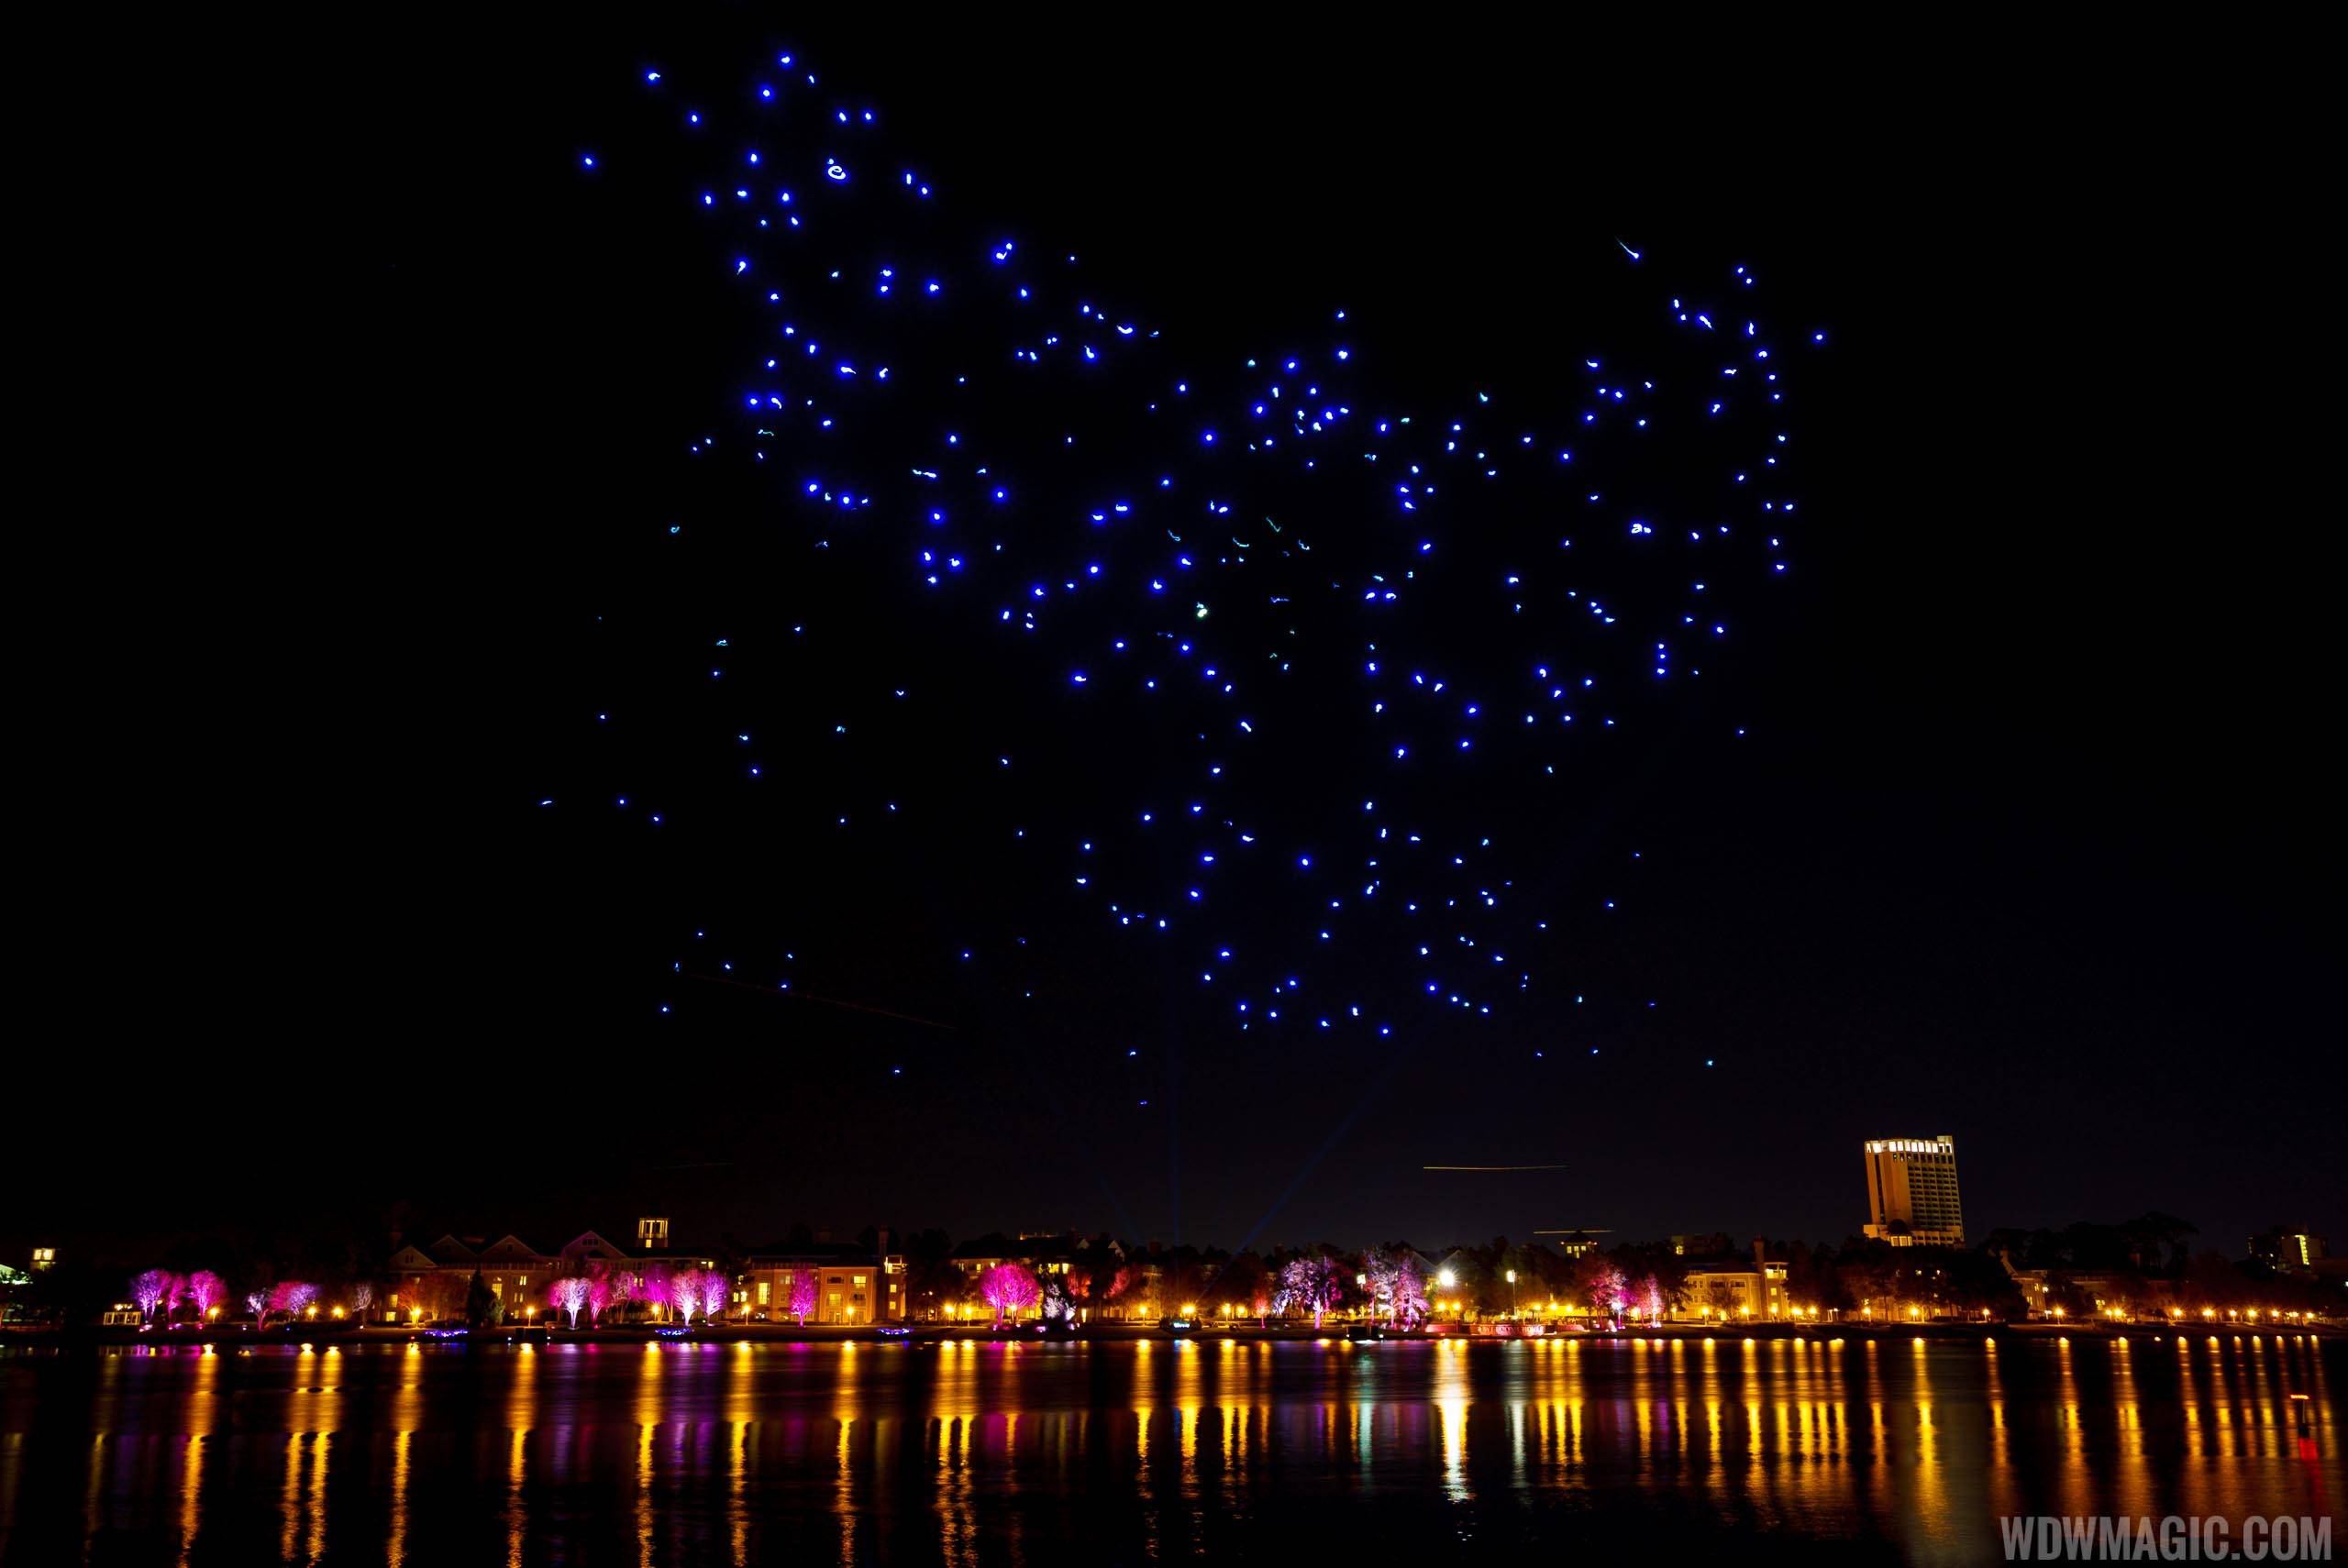 VIDEO - The making of 'Starbright Holidays' drone show